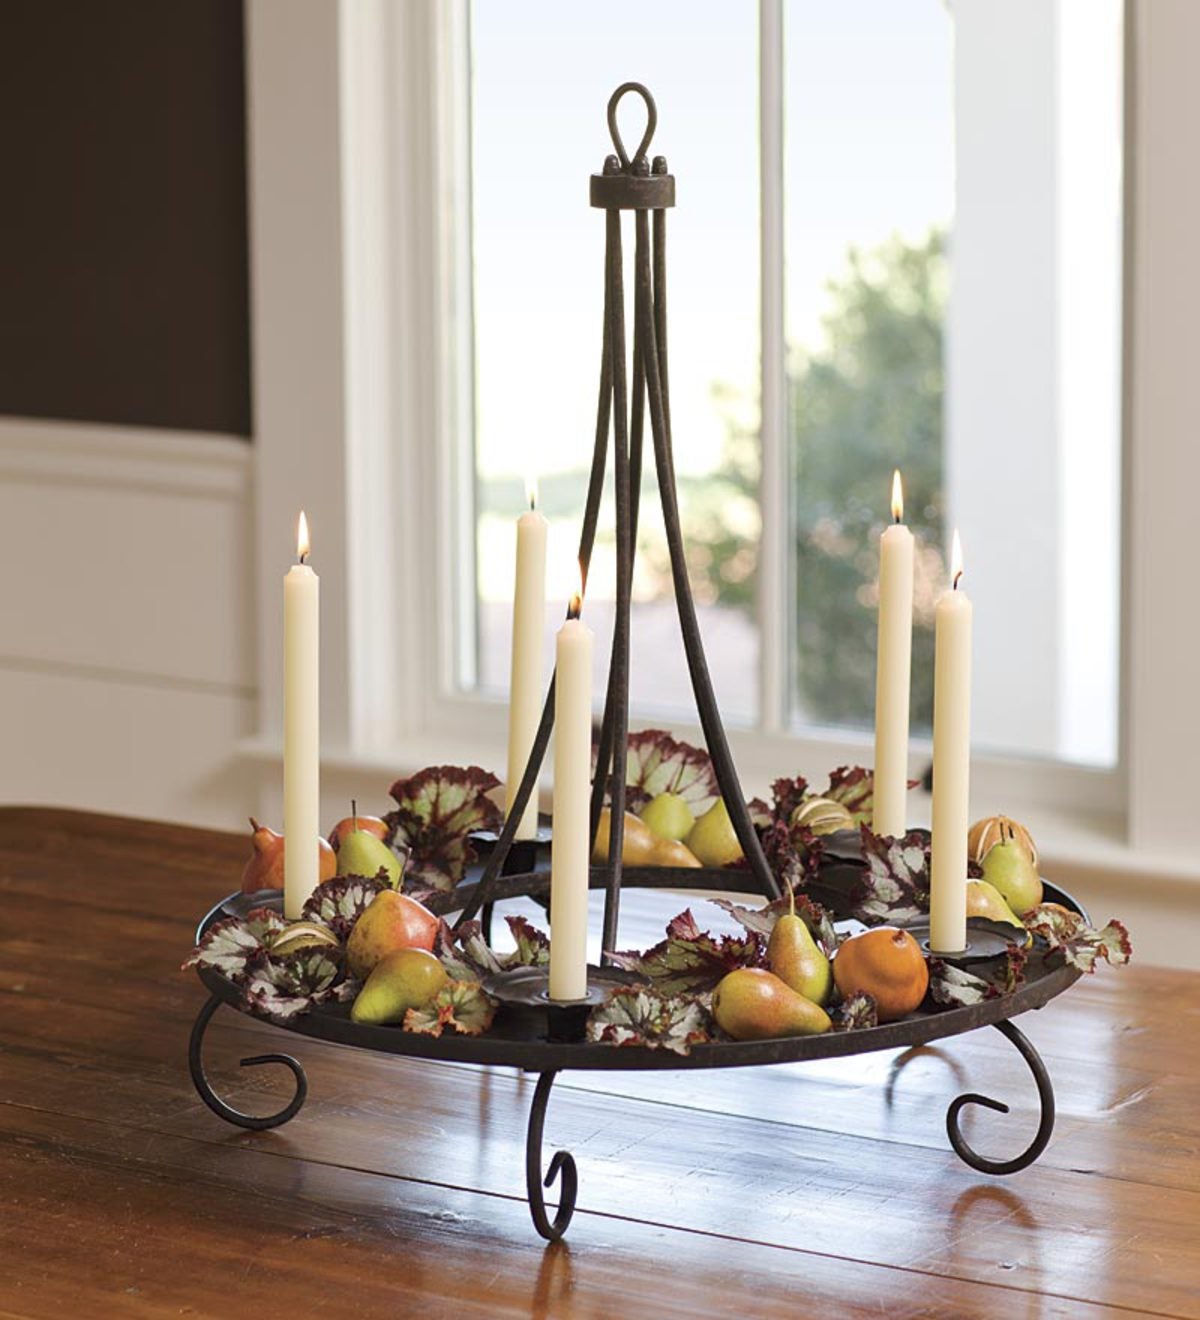 Iron Candle Chandelier With Distressed, Bed Bath Beyond Candle Holder Chandelier